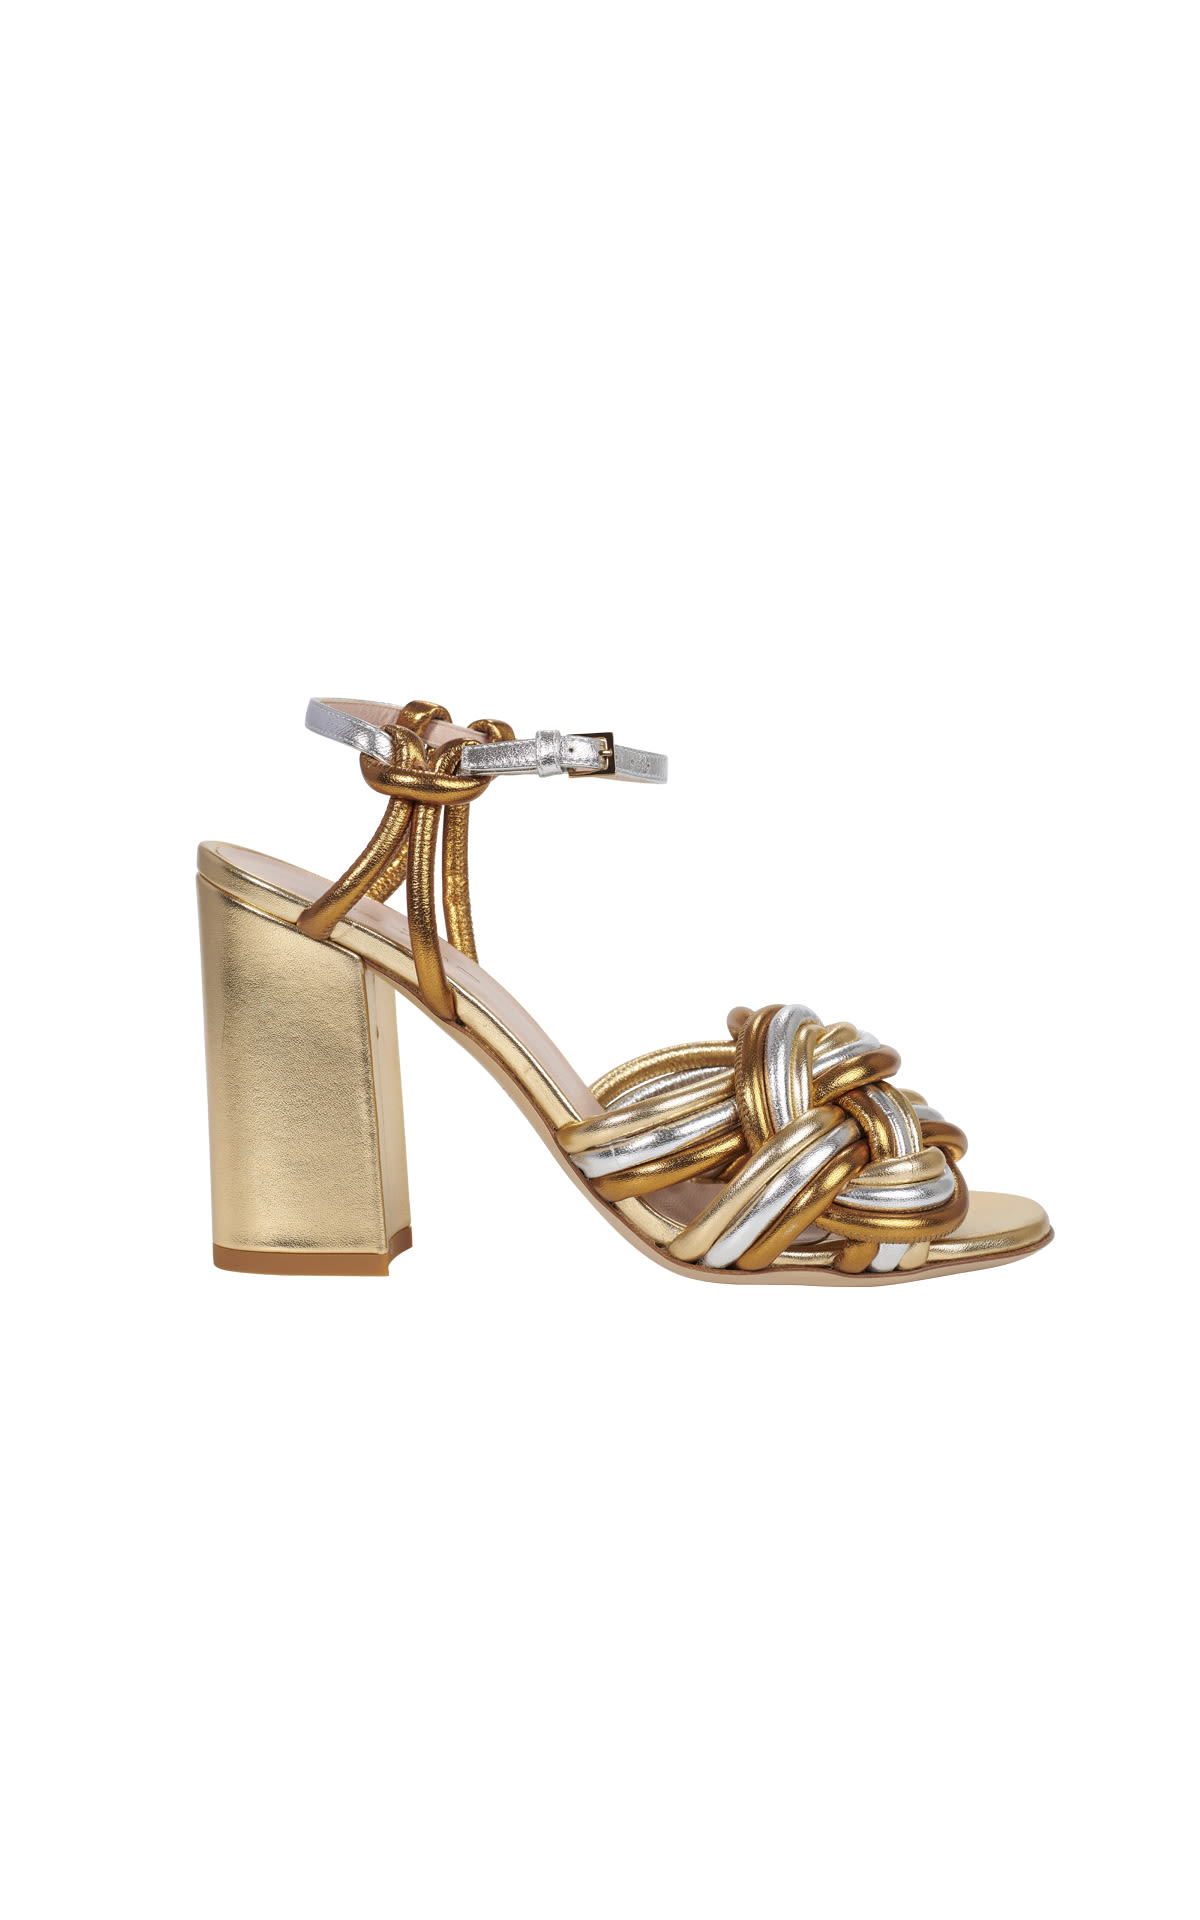 Gold and silver sandal with heel Etro